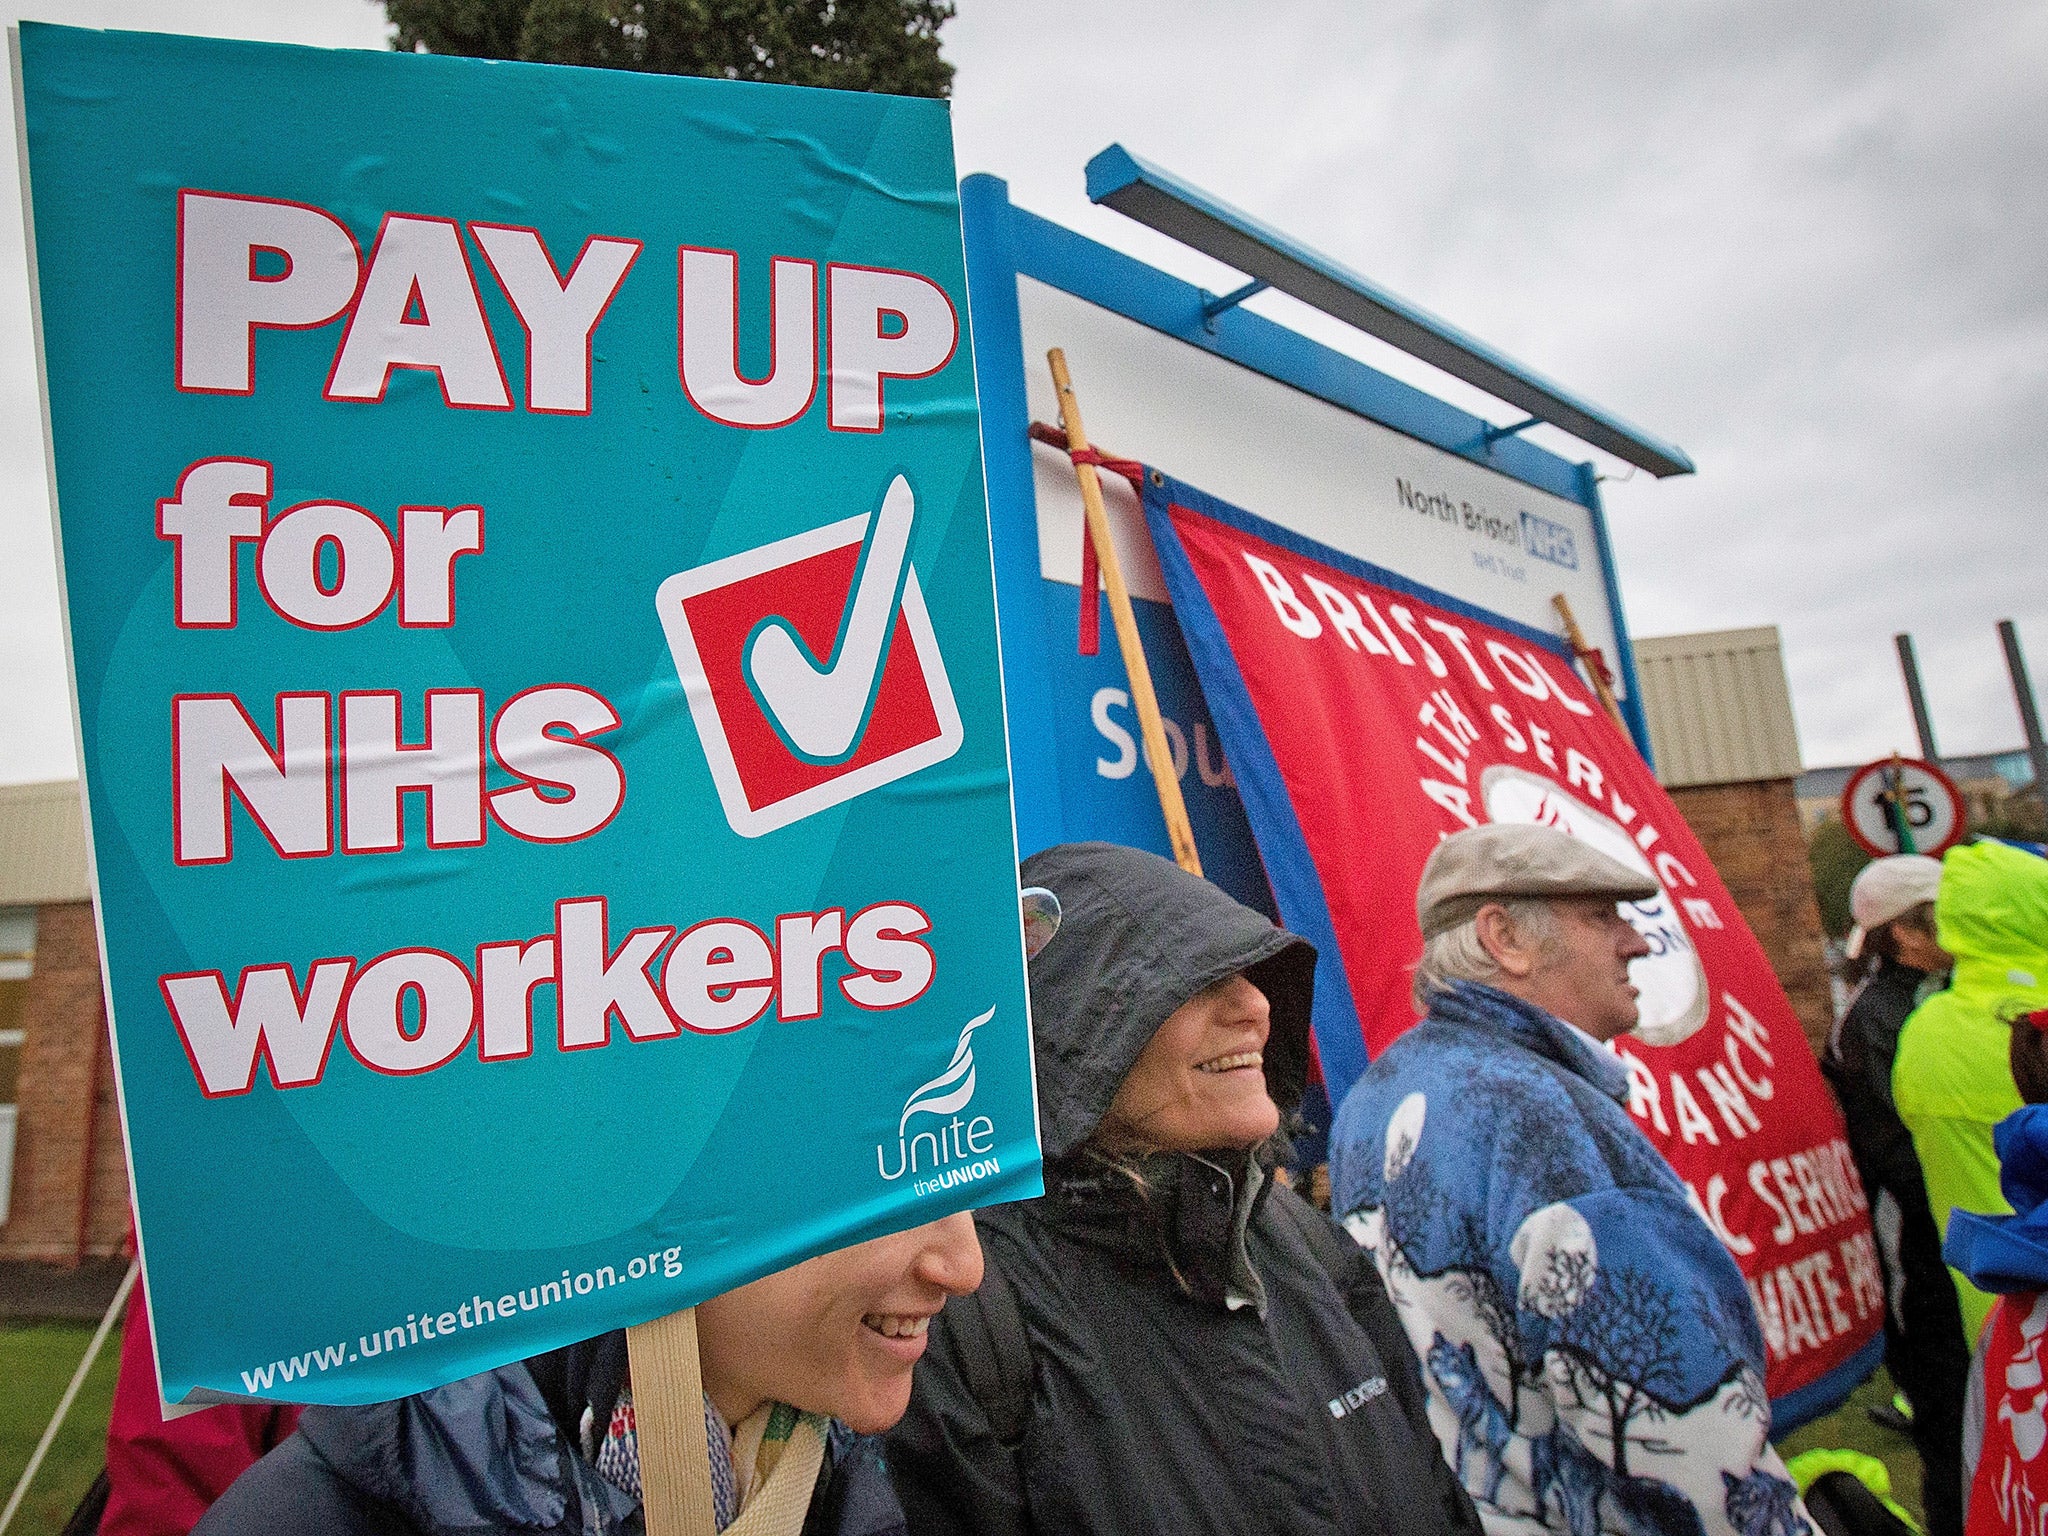 NHS workers, including nurses, went on a four-hour strike last October. It was the first strike by NHS staff over pay in more than 30 years